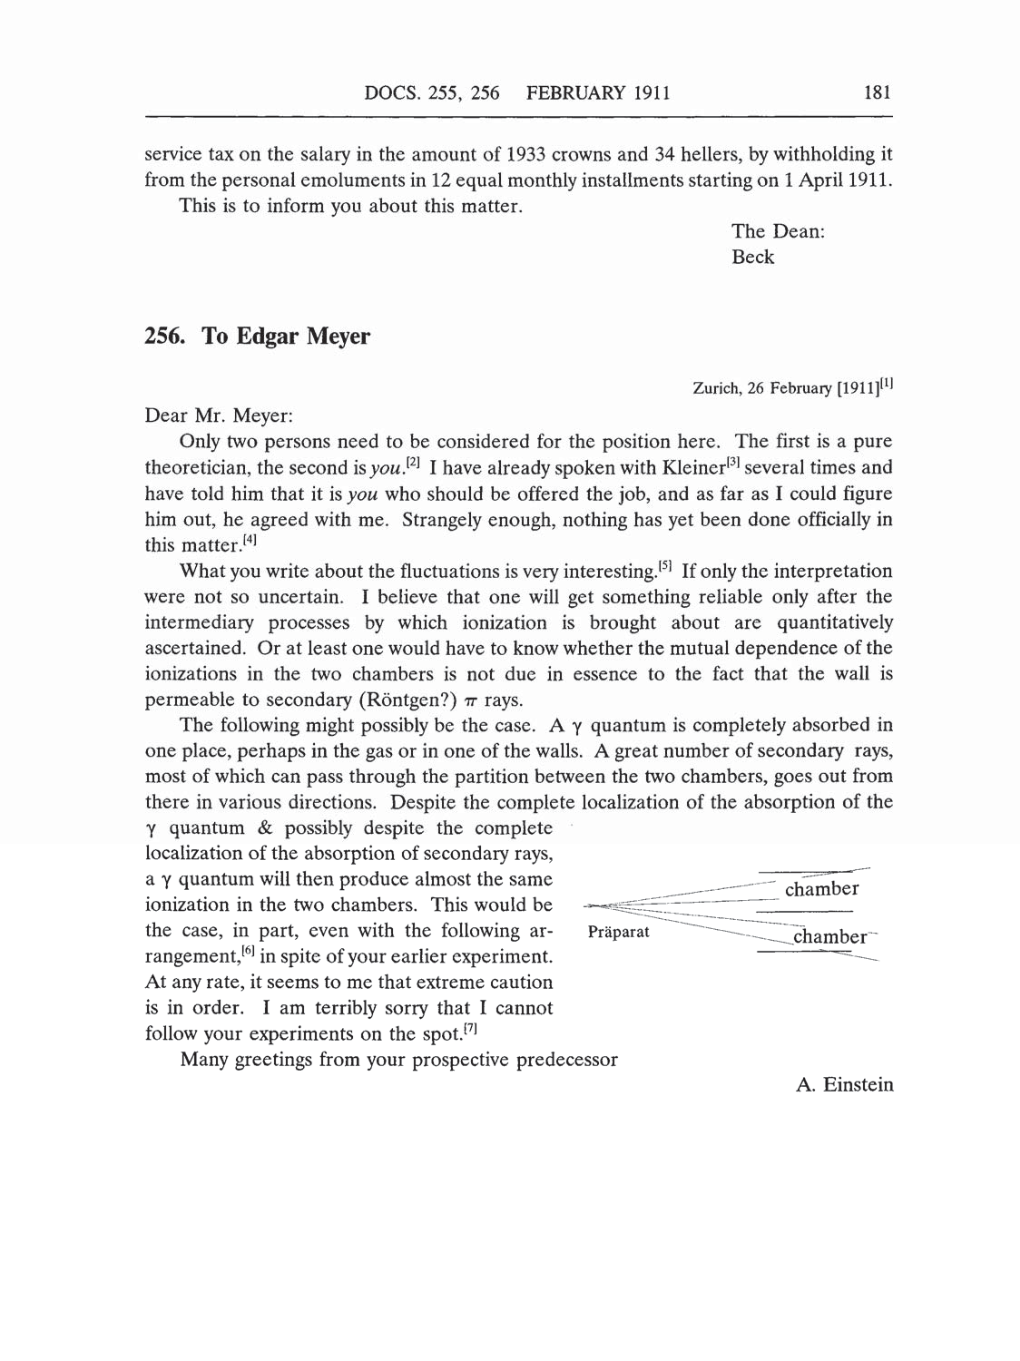 Volume 5: The Swiss Years: Correspondence, 1902-1914 (English translation supplement) page 181